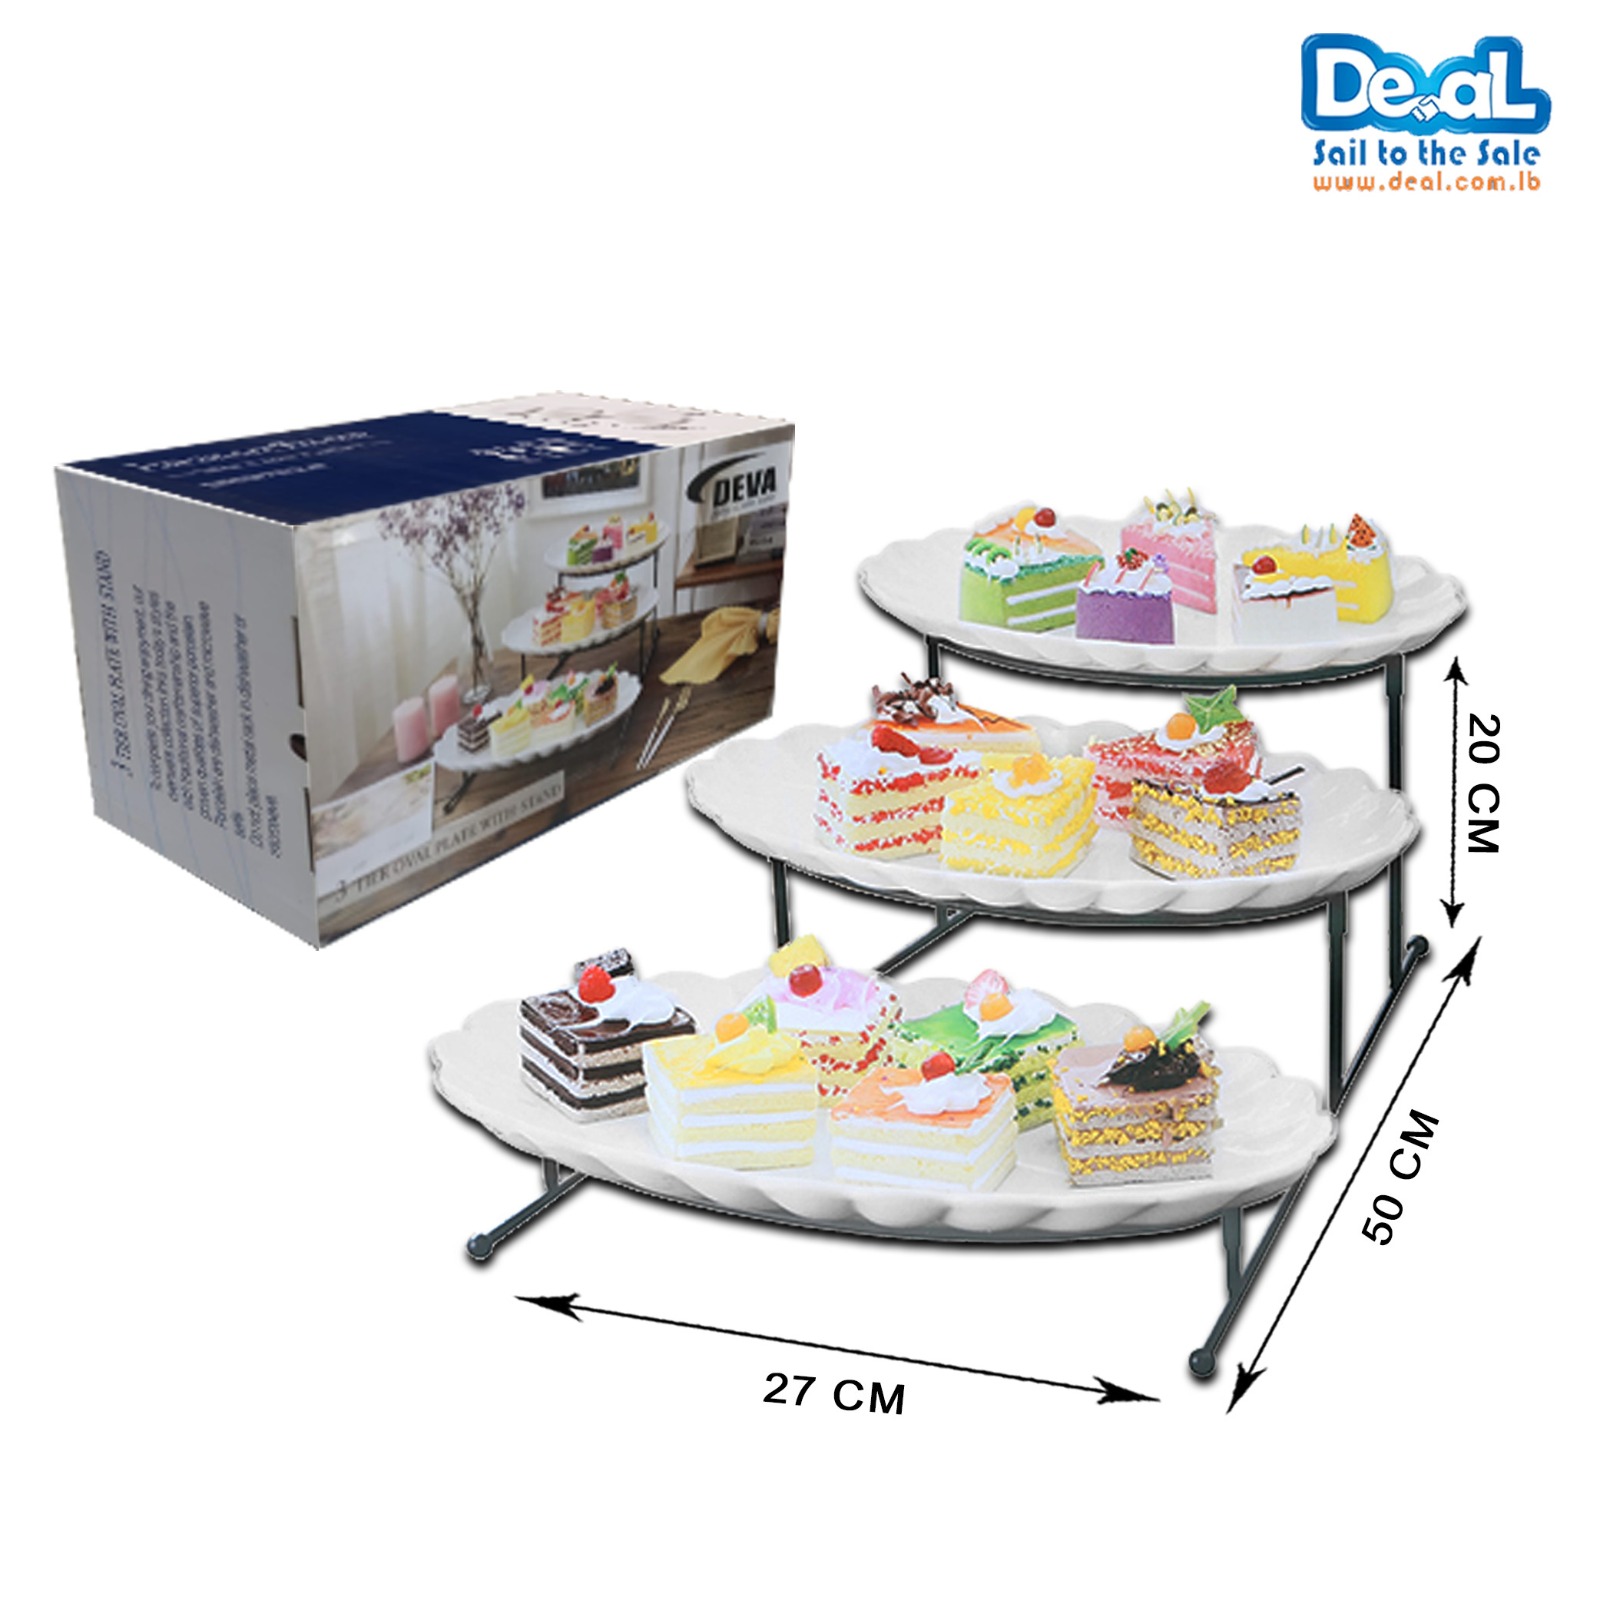 3 Tier Oval Plate With Stand 50*20*27cm